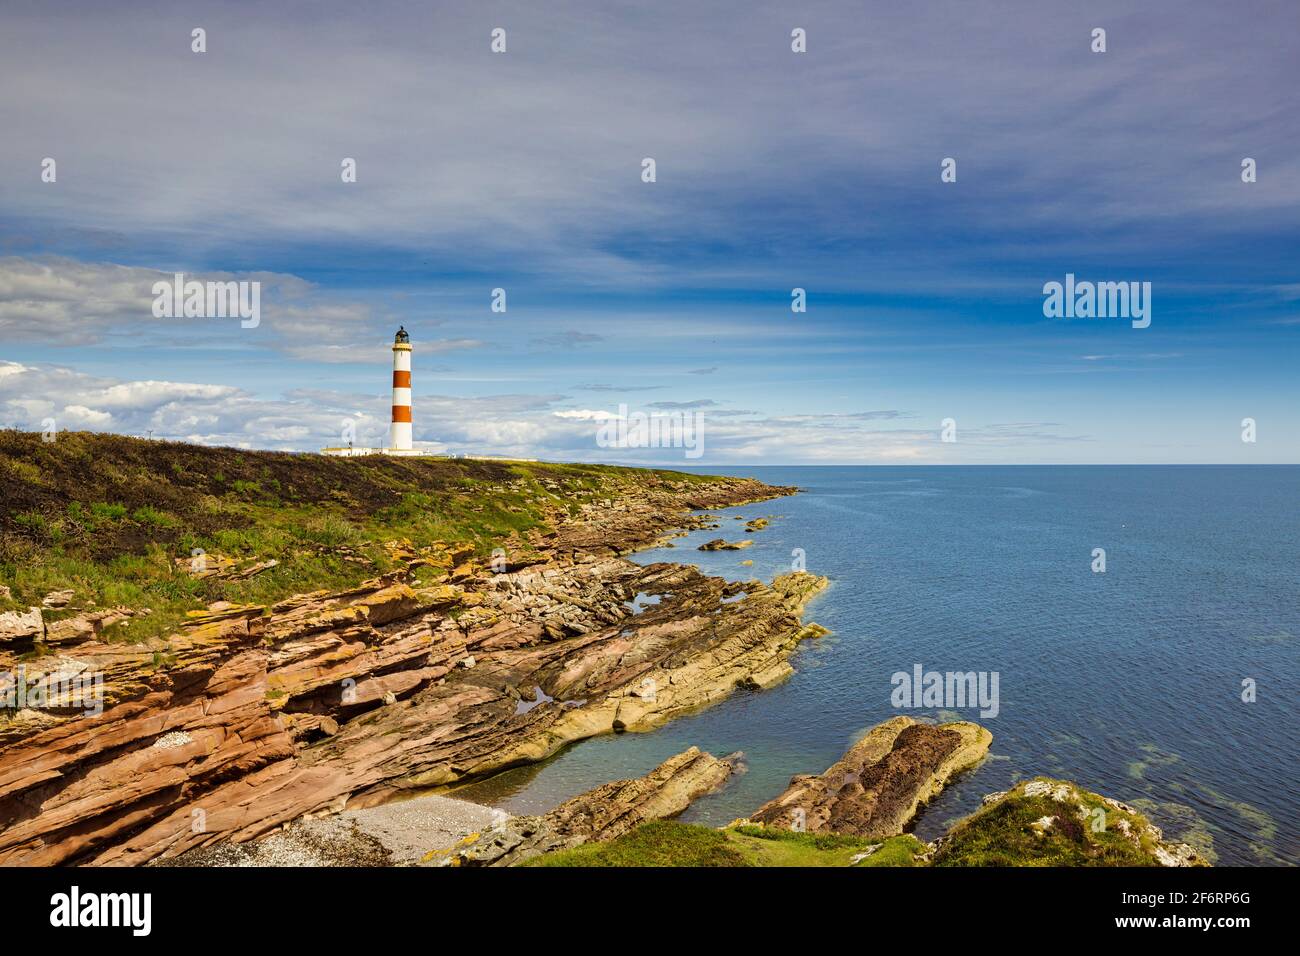 The rocky coastline of the Tarbat Ness peninsula with the lighthouse in the distance. Stock Photo